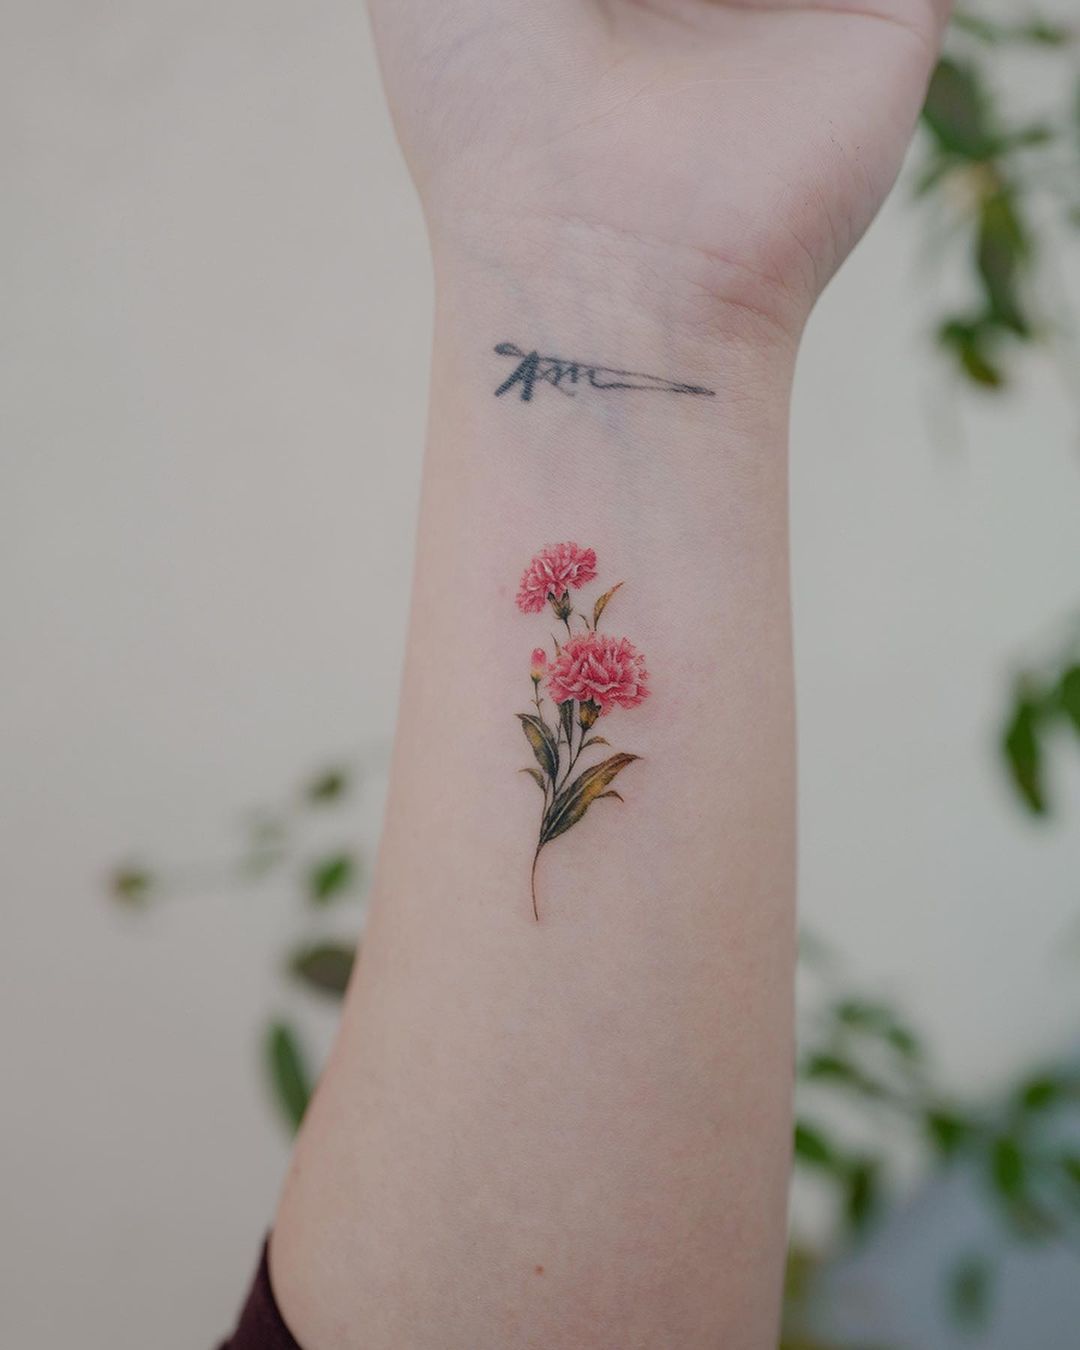 Delicate Tattoos That Look Just Like Incredible Jewelry | CafeMom.com